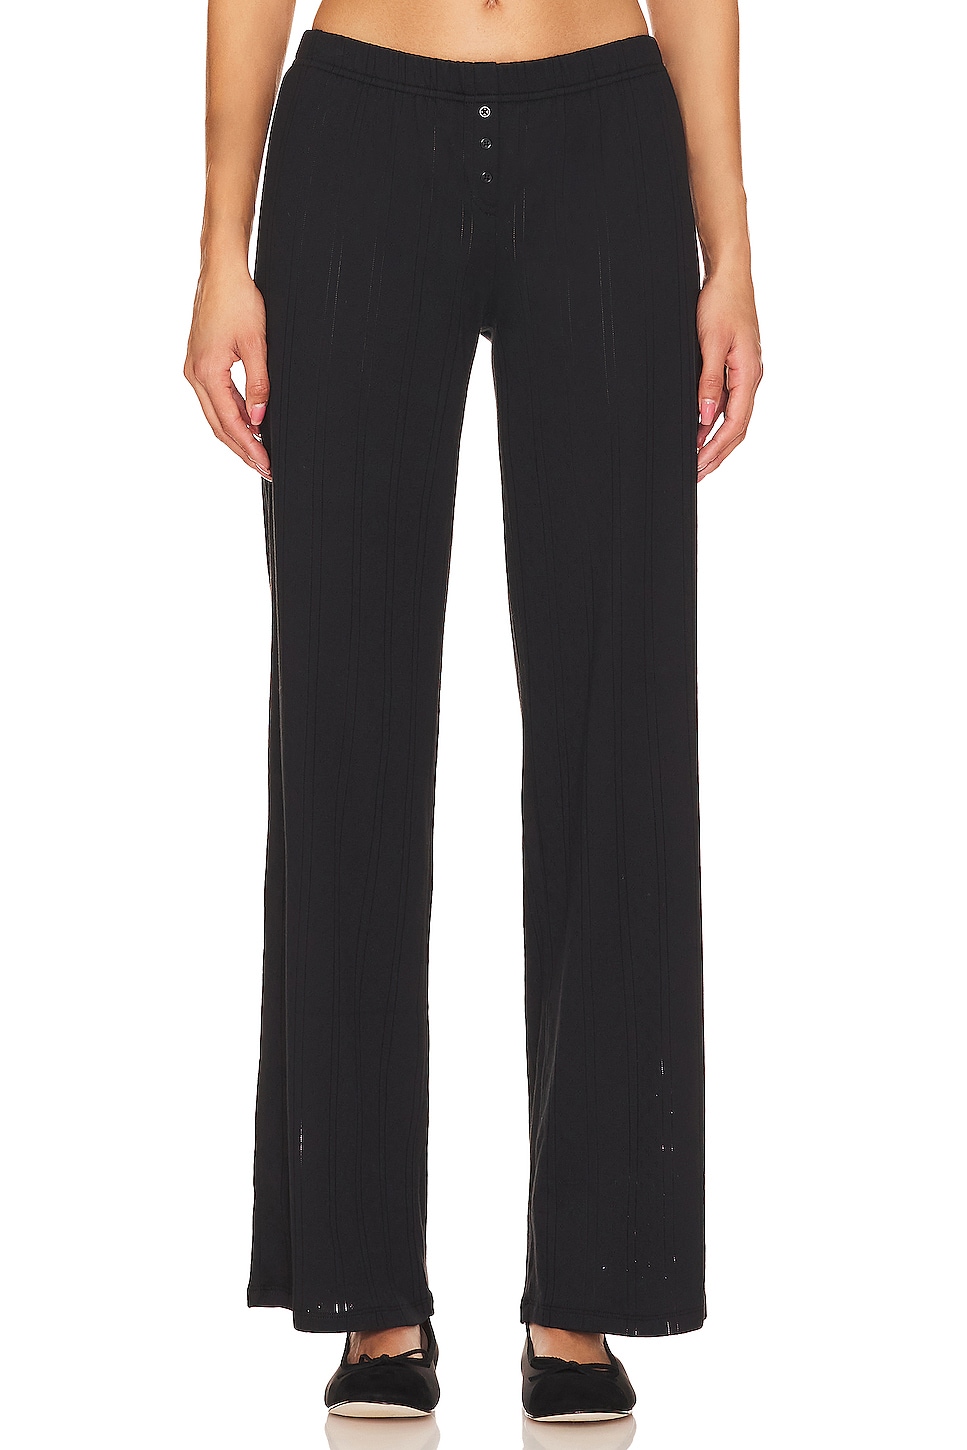 Beyond Yoga City Chic Cargo Pant in Black